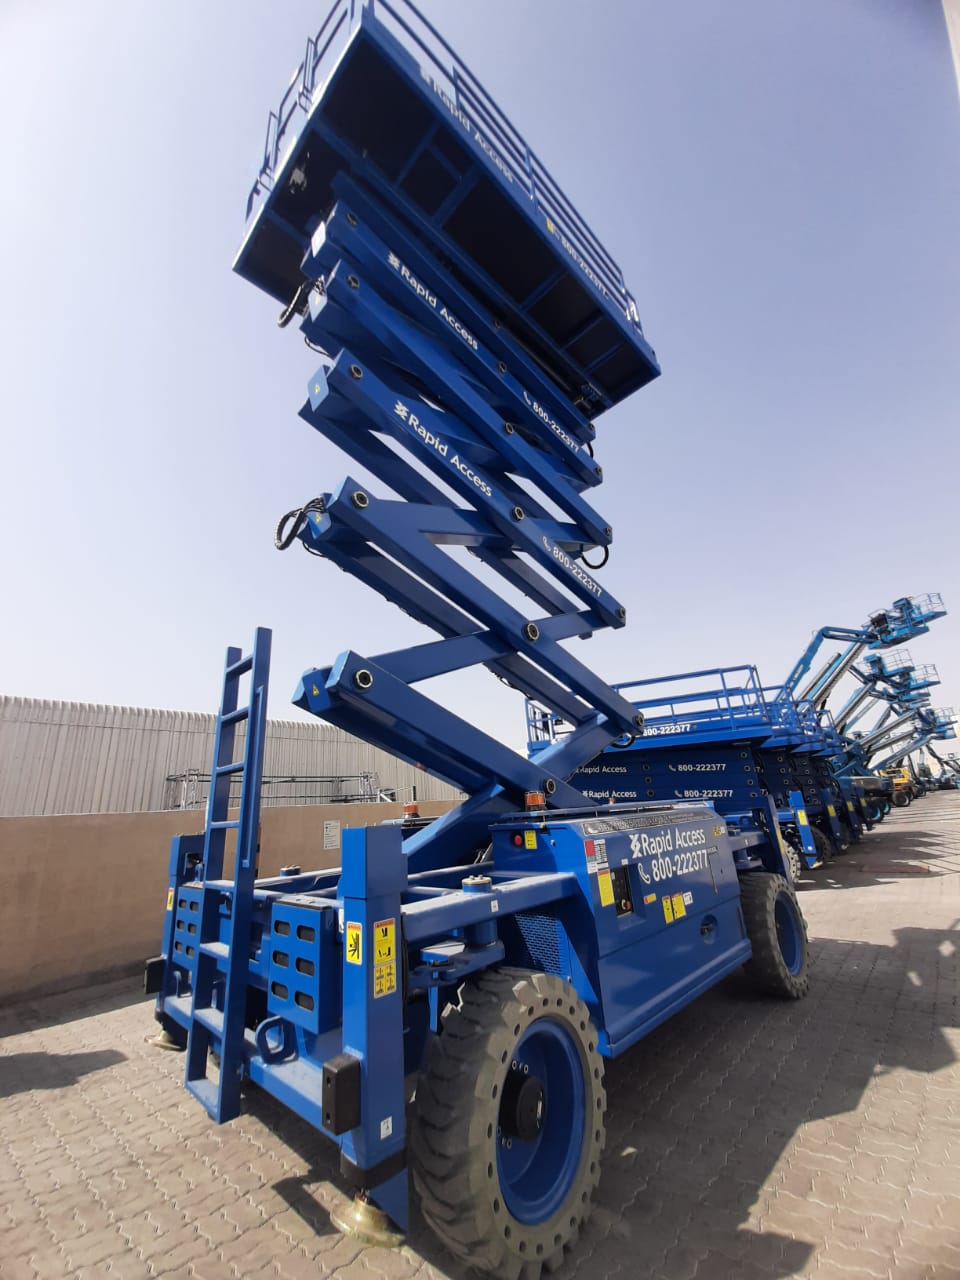 Rapid Access is adding 84 Dingli Scissor Lifts as part of its fleet expansion programme